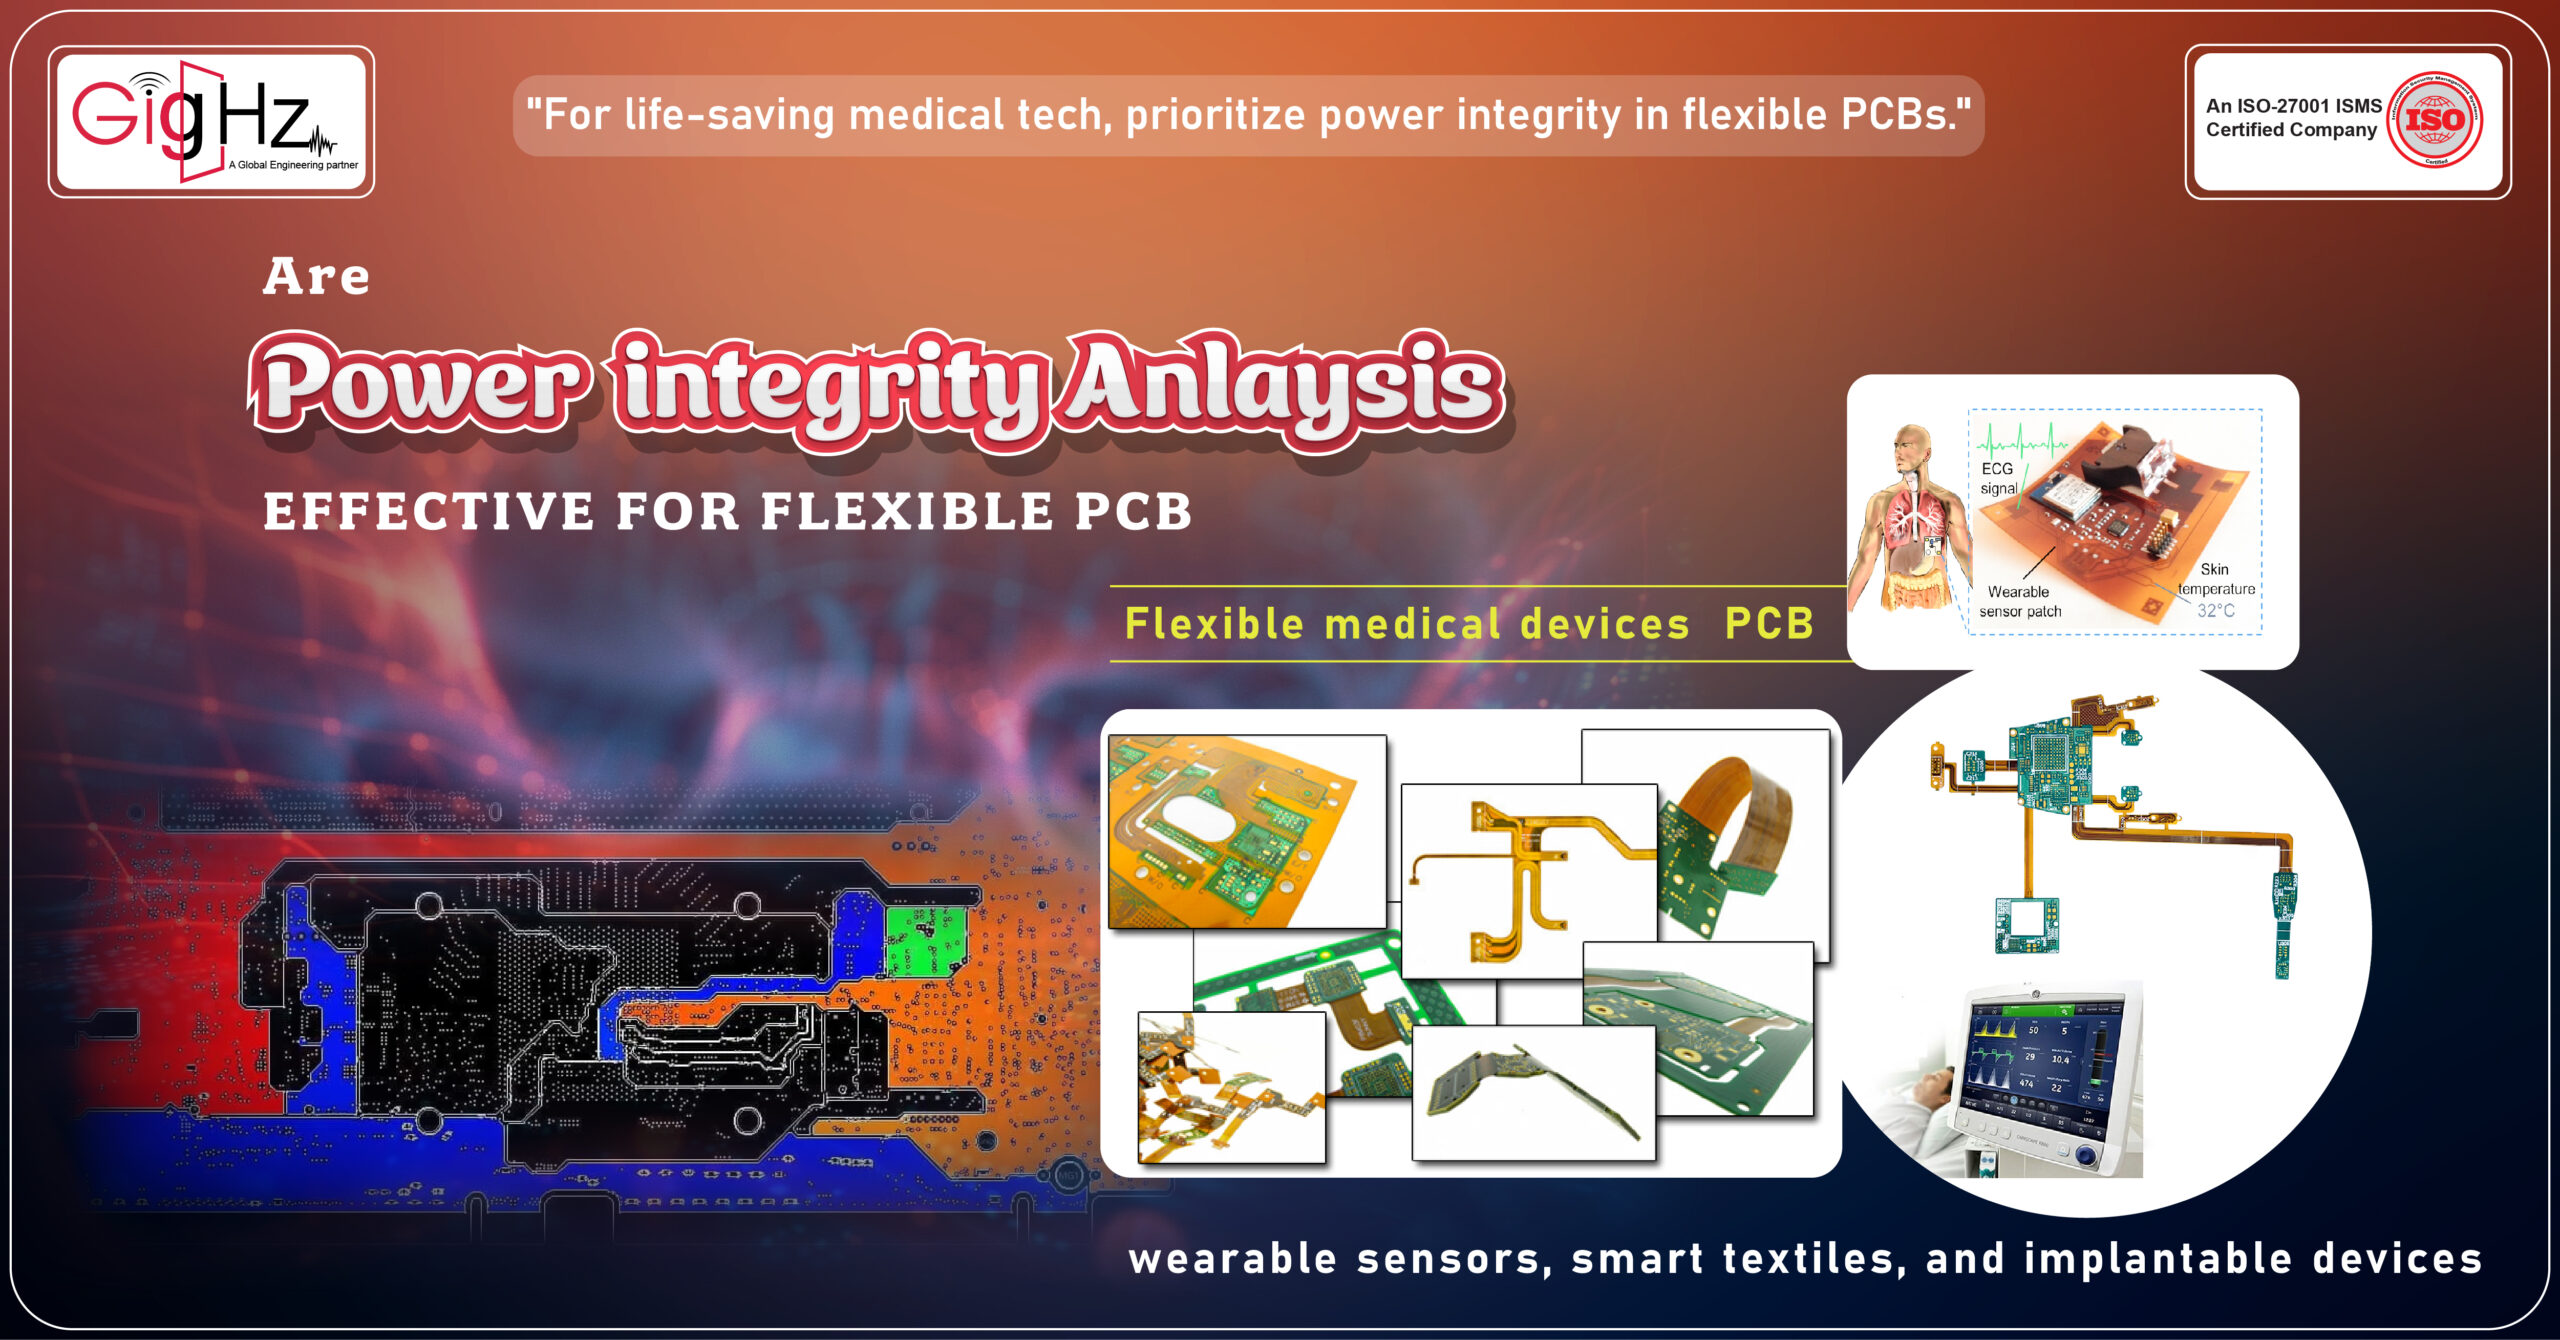 Are power integrity analysis effective for flexible PCB: Let’s Find Out!